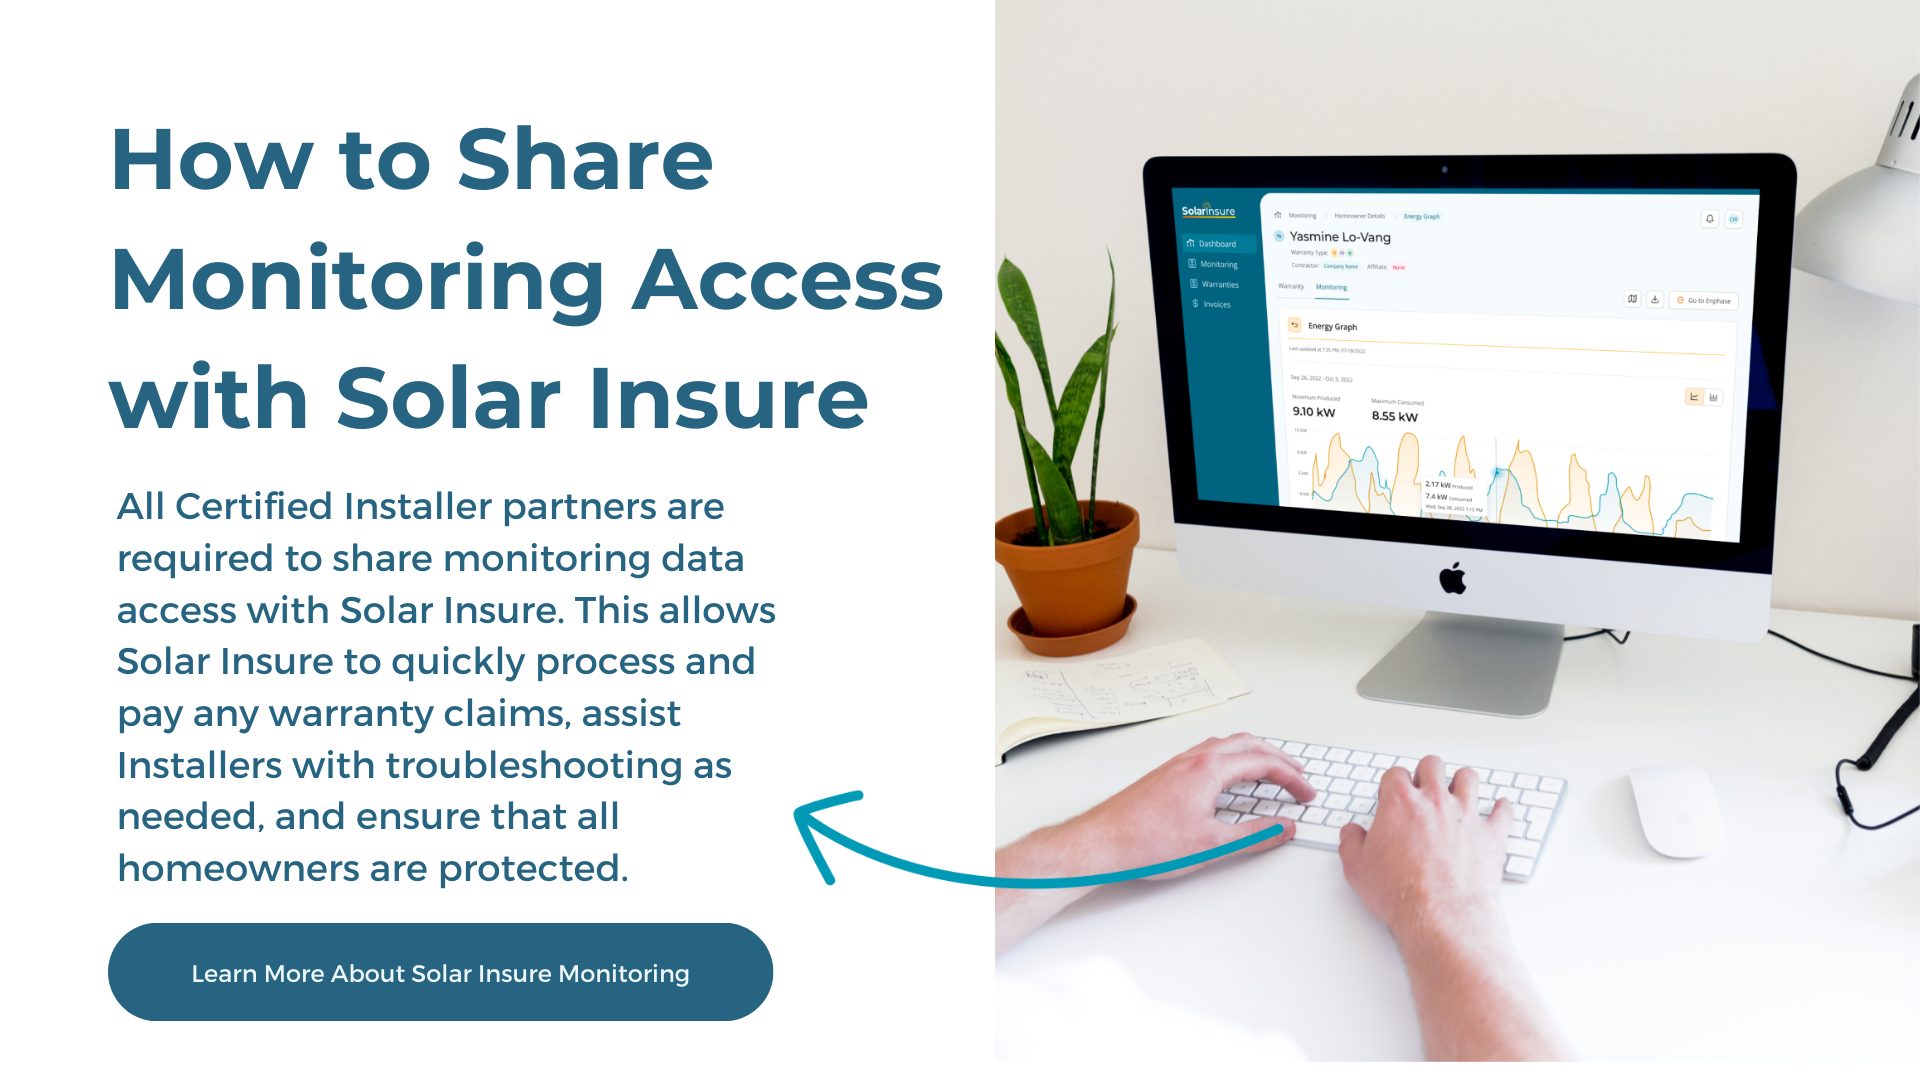 How to Review Monitoring Data with Solar Insure 5